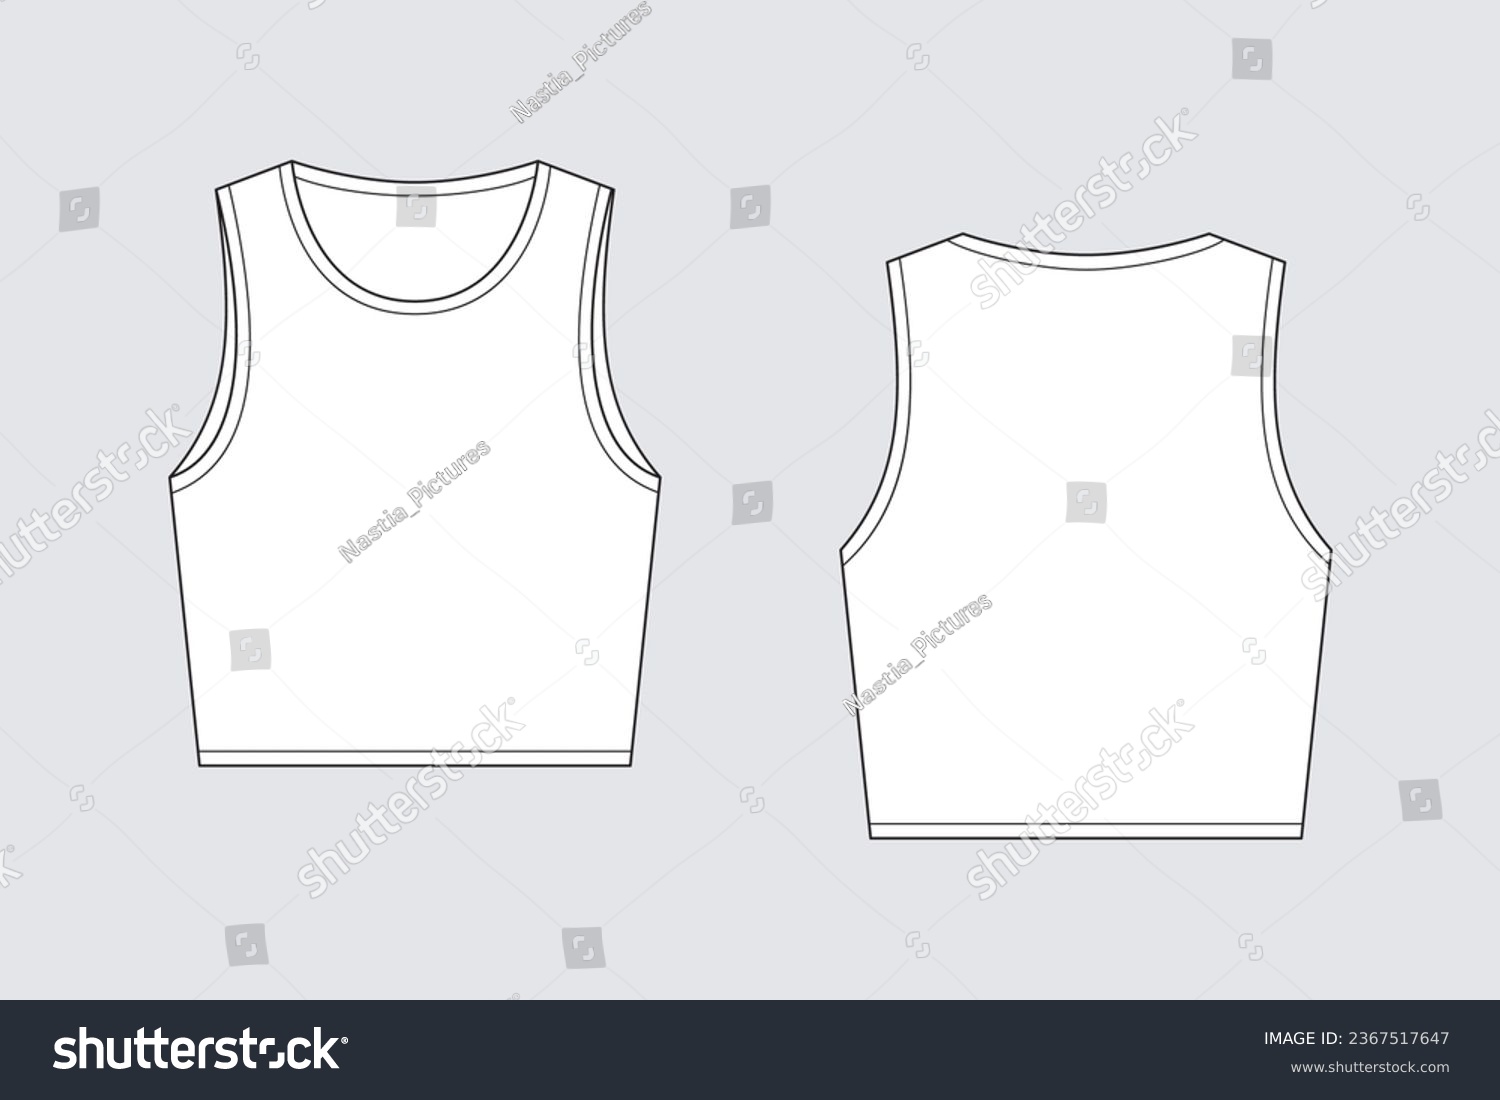 Female crop top vector template isolated on a grey background. Front and back view. Outline fashion technical sketch of clothes model. #2367517647